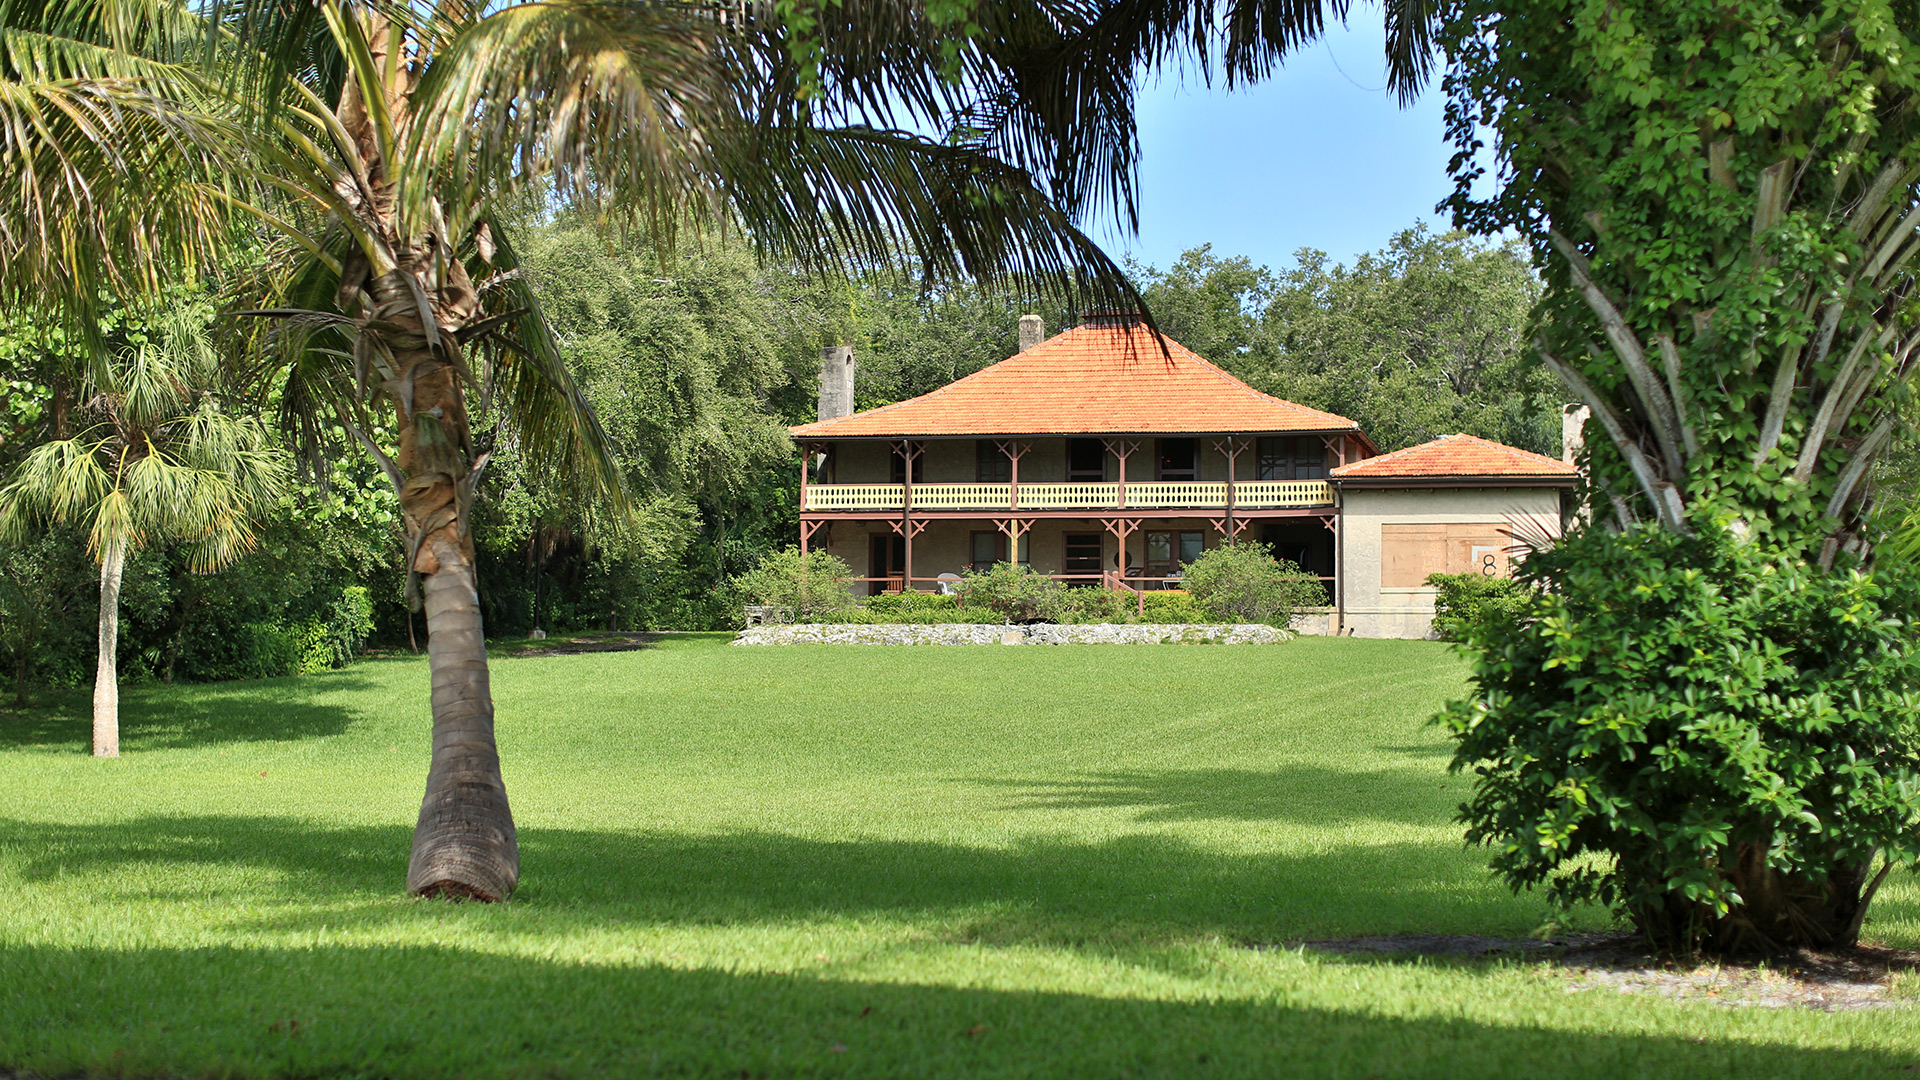 View of The Barnacle, a two-story wooden house with an orange shingled roof. A green lawn leads up to the house. Courtesy of GMCVB/miamiandbeaches.com